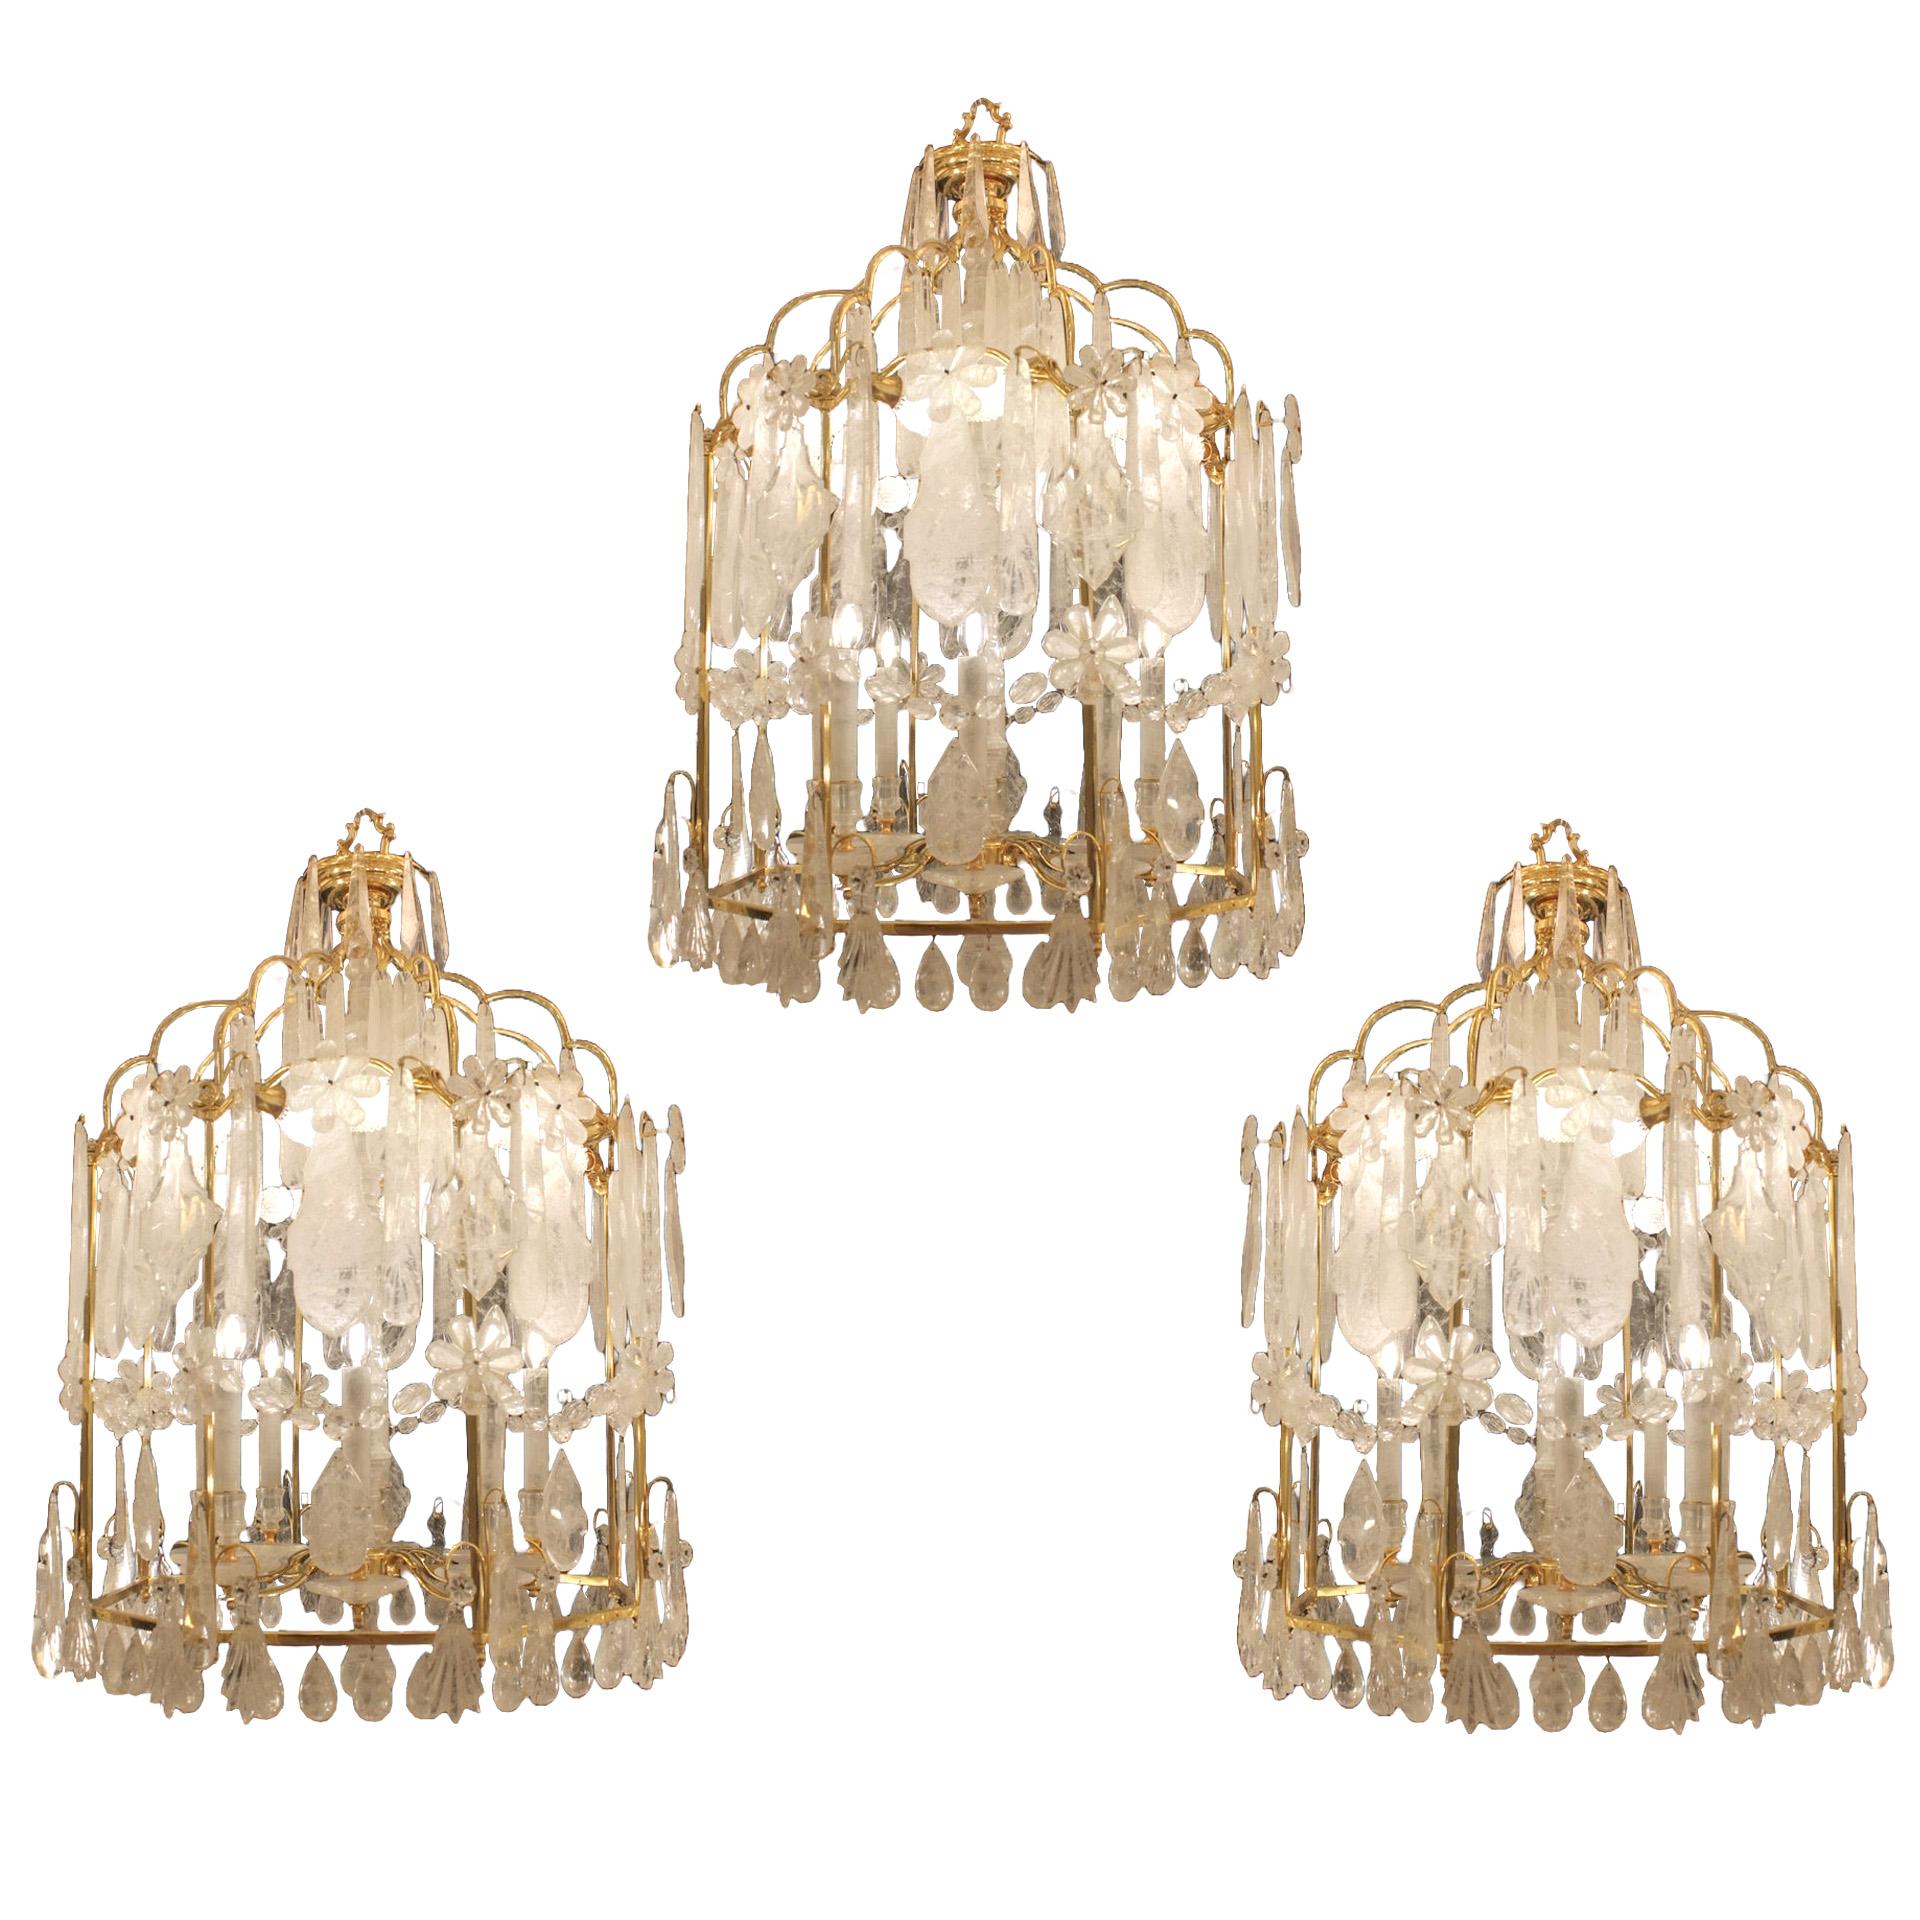 A trio of Rock Crystal Lanterns
Exceptional modern rock crystal lanterns, brass frame in a pure French 19th century style. Dressed with rock crystal flowers, plaques and drops and festooned with beads. The shaft of the frame is covered in rock